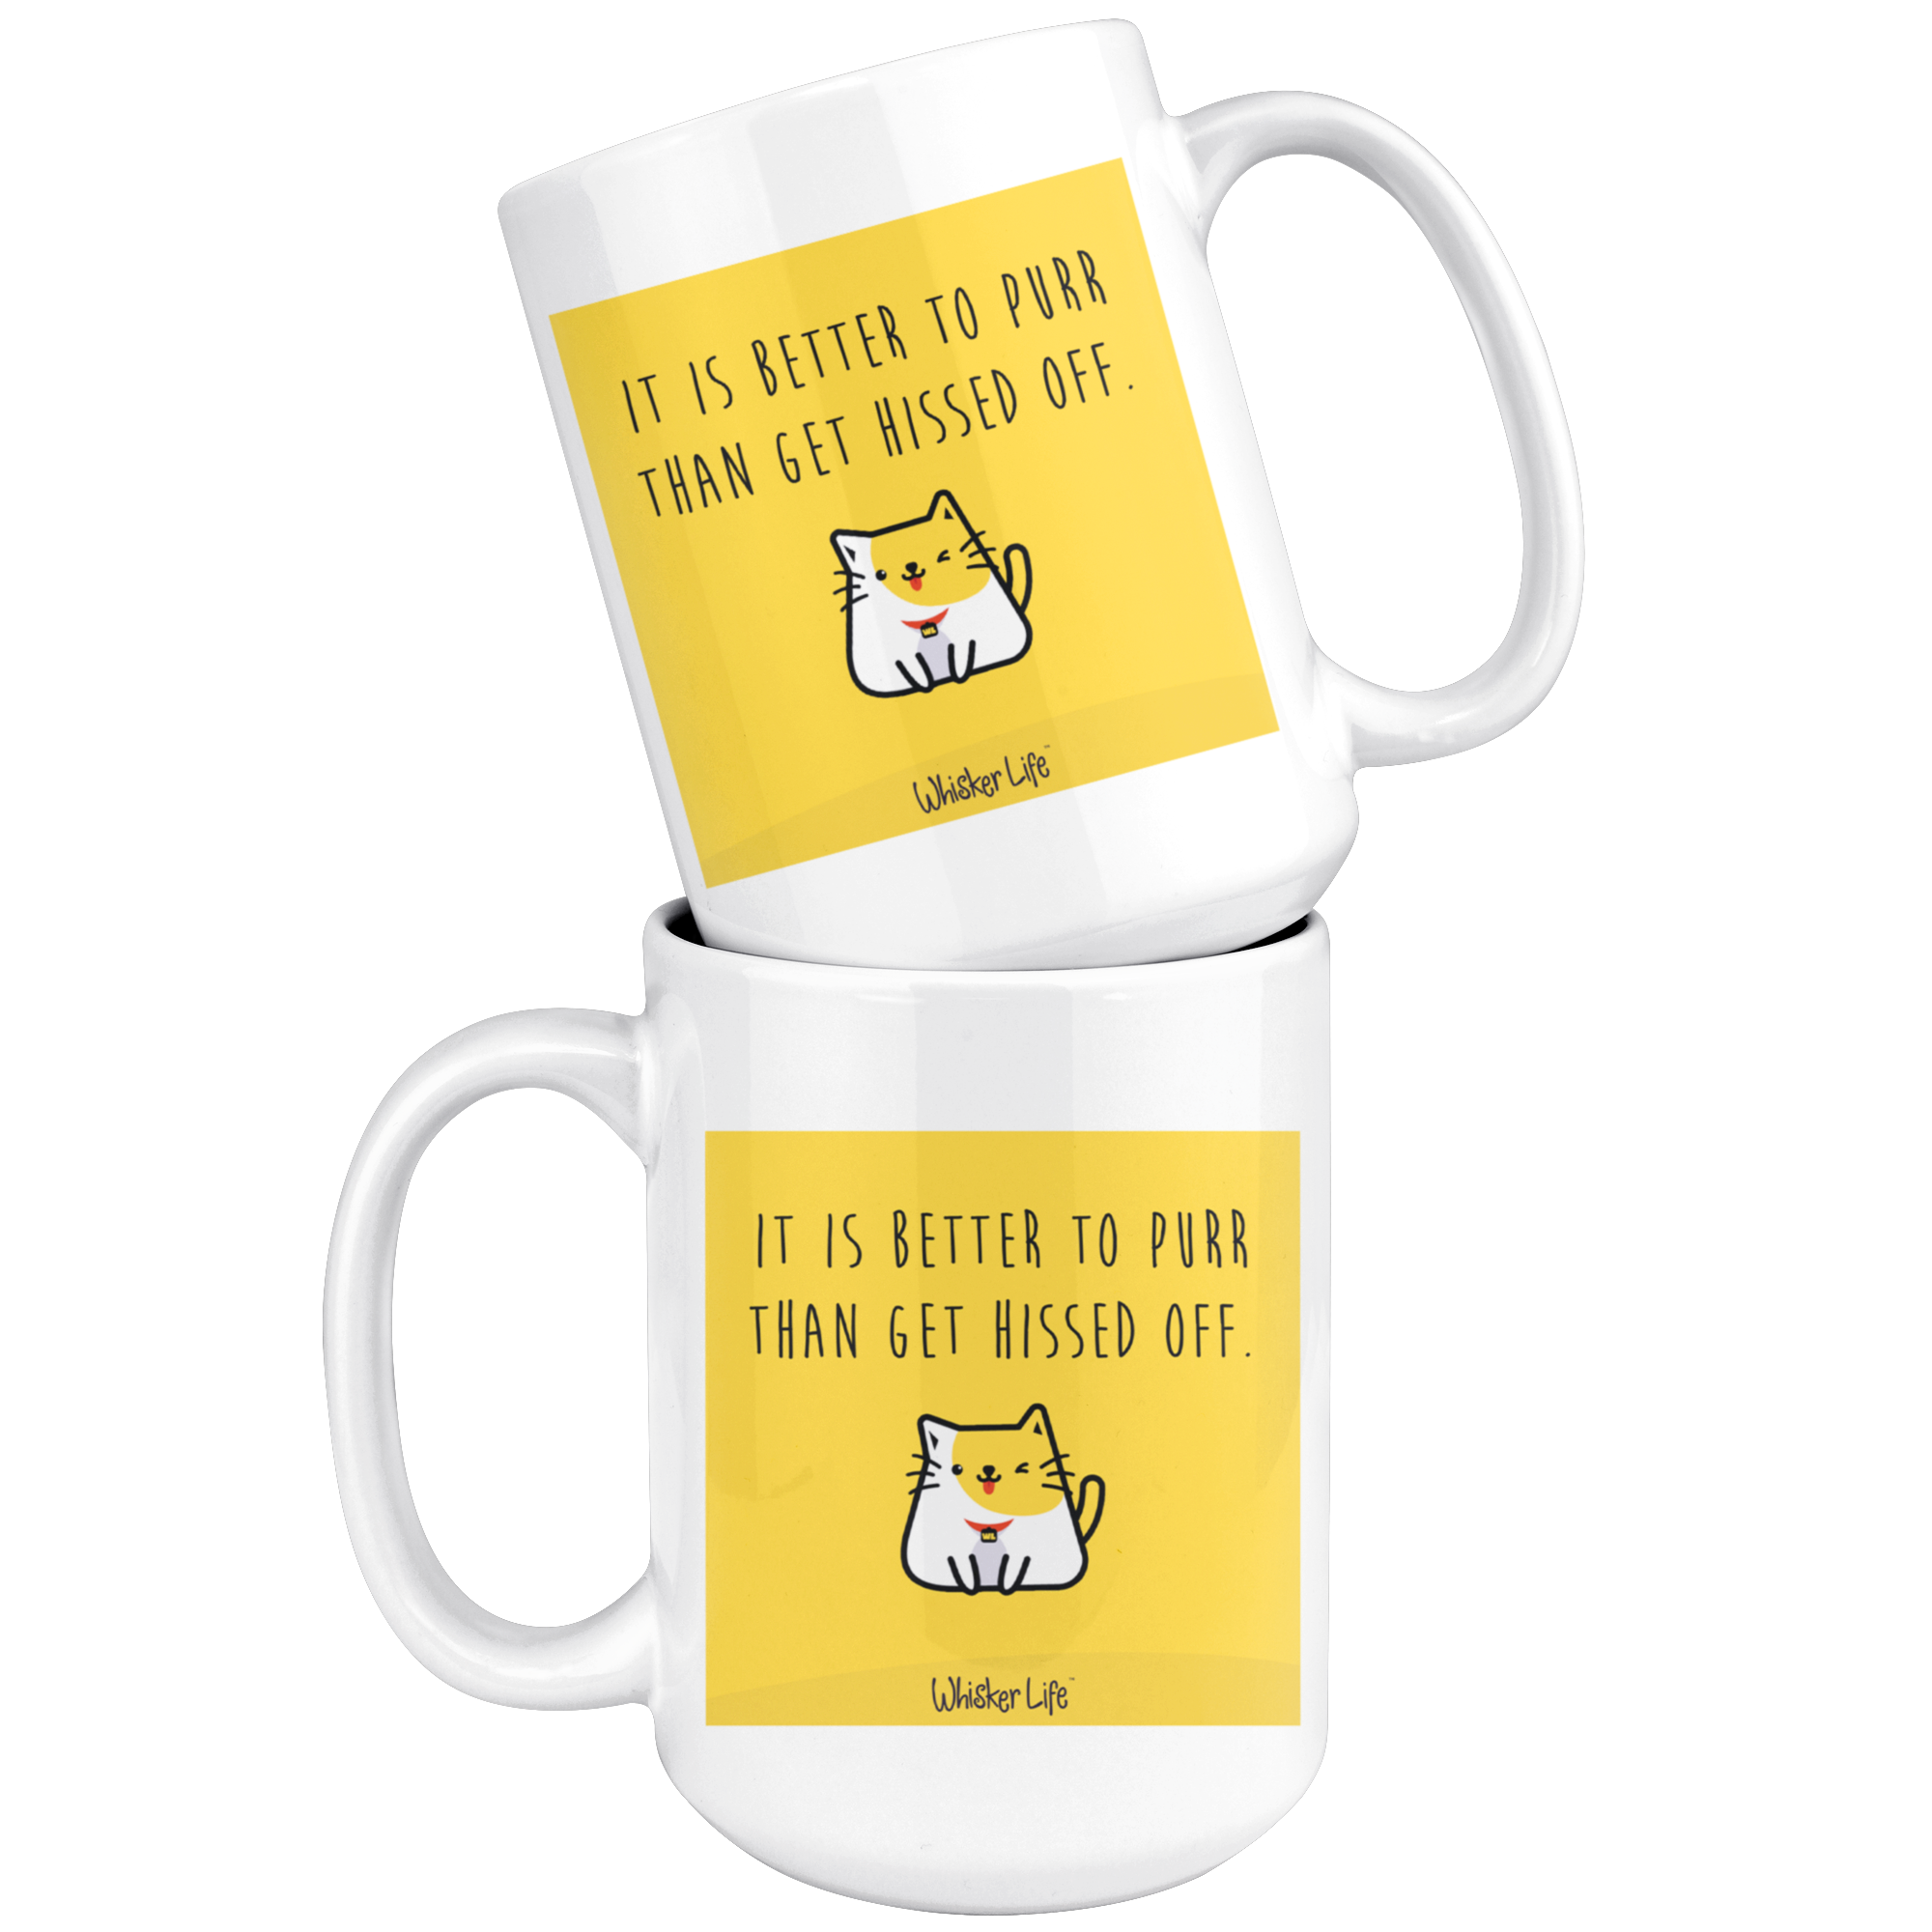 It Is Better To Purr Than Get Hissed Off - Whisker Life Large 15 oz Coffee Mug